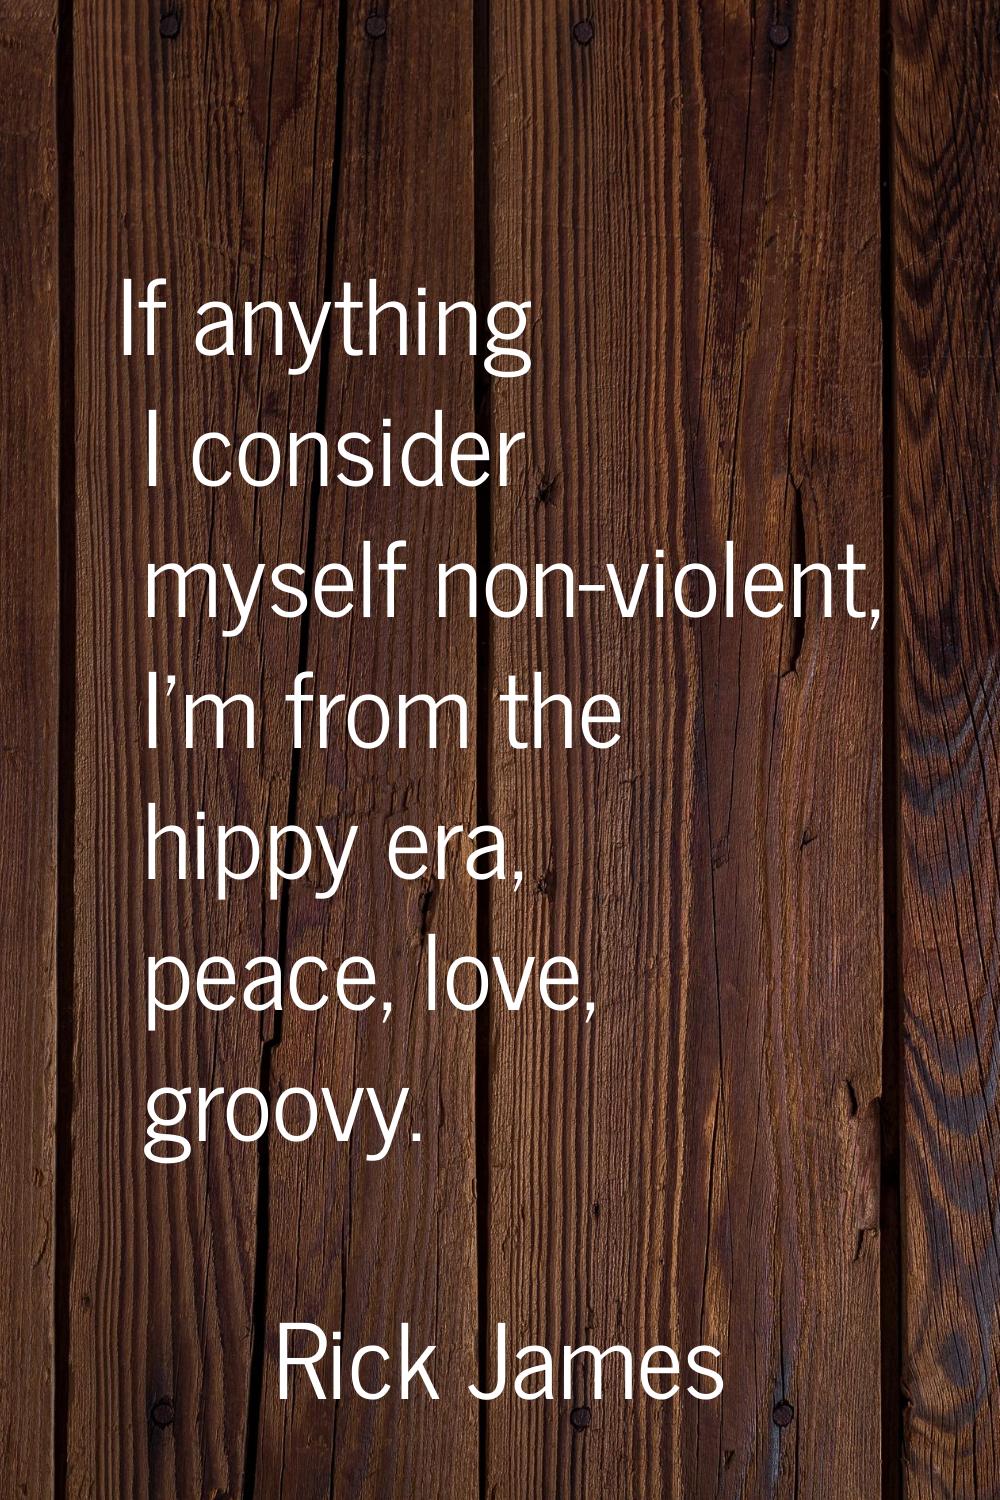 If anything I consider myself non-violent, I'm from the hippy era, peace, love, groovy.